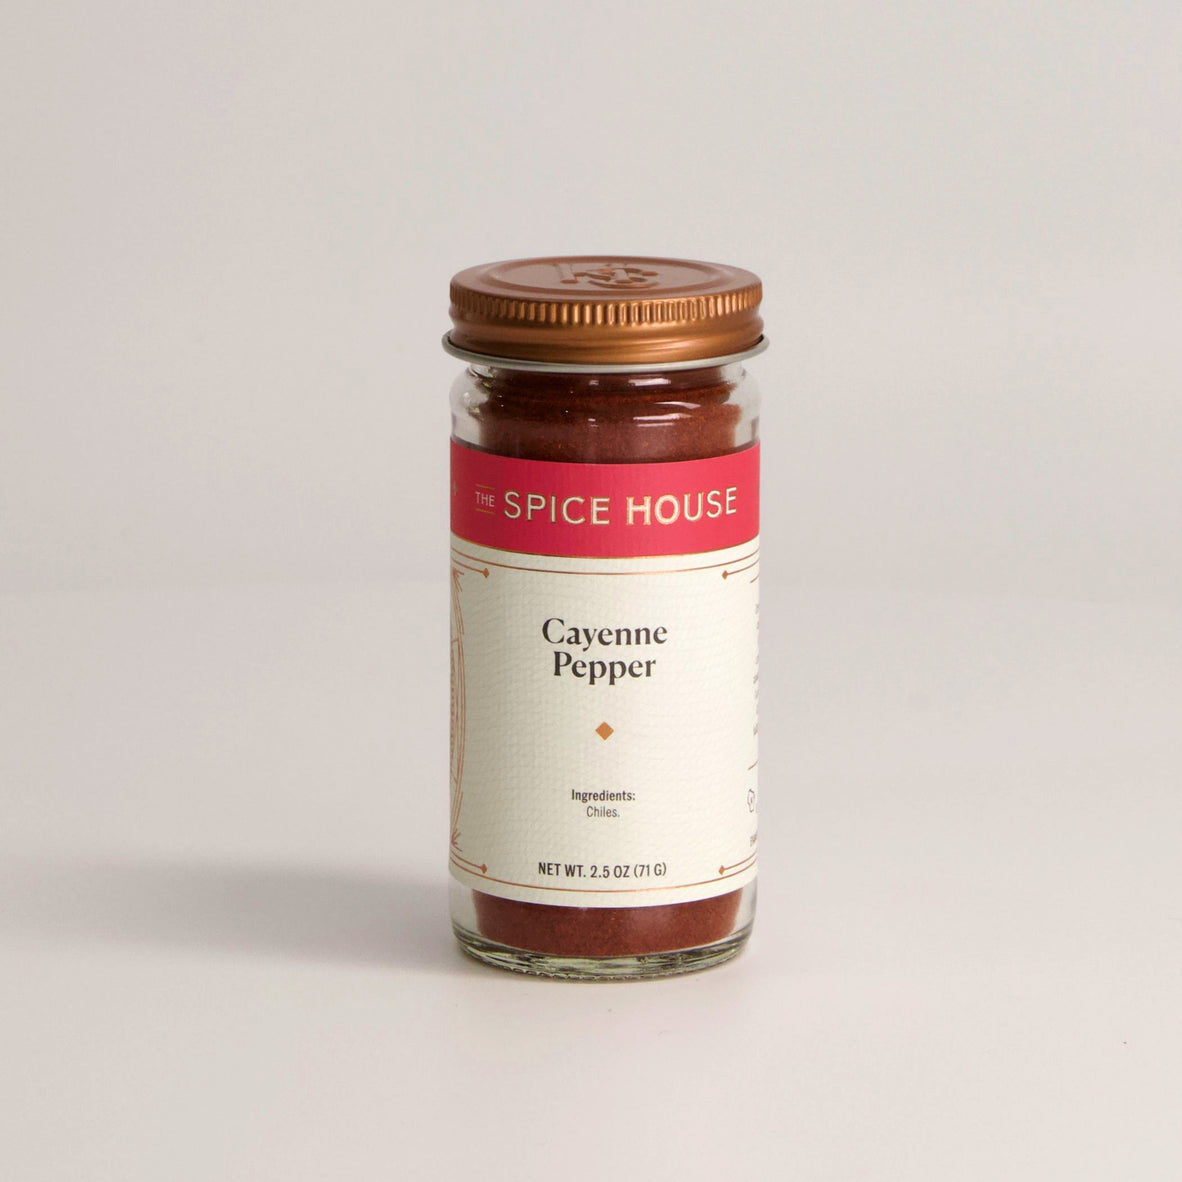 Cayenne Pepper Spice for Sale - The Spice House